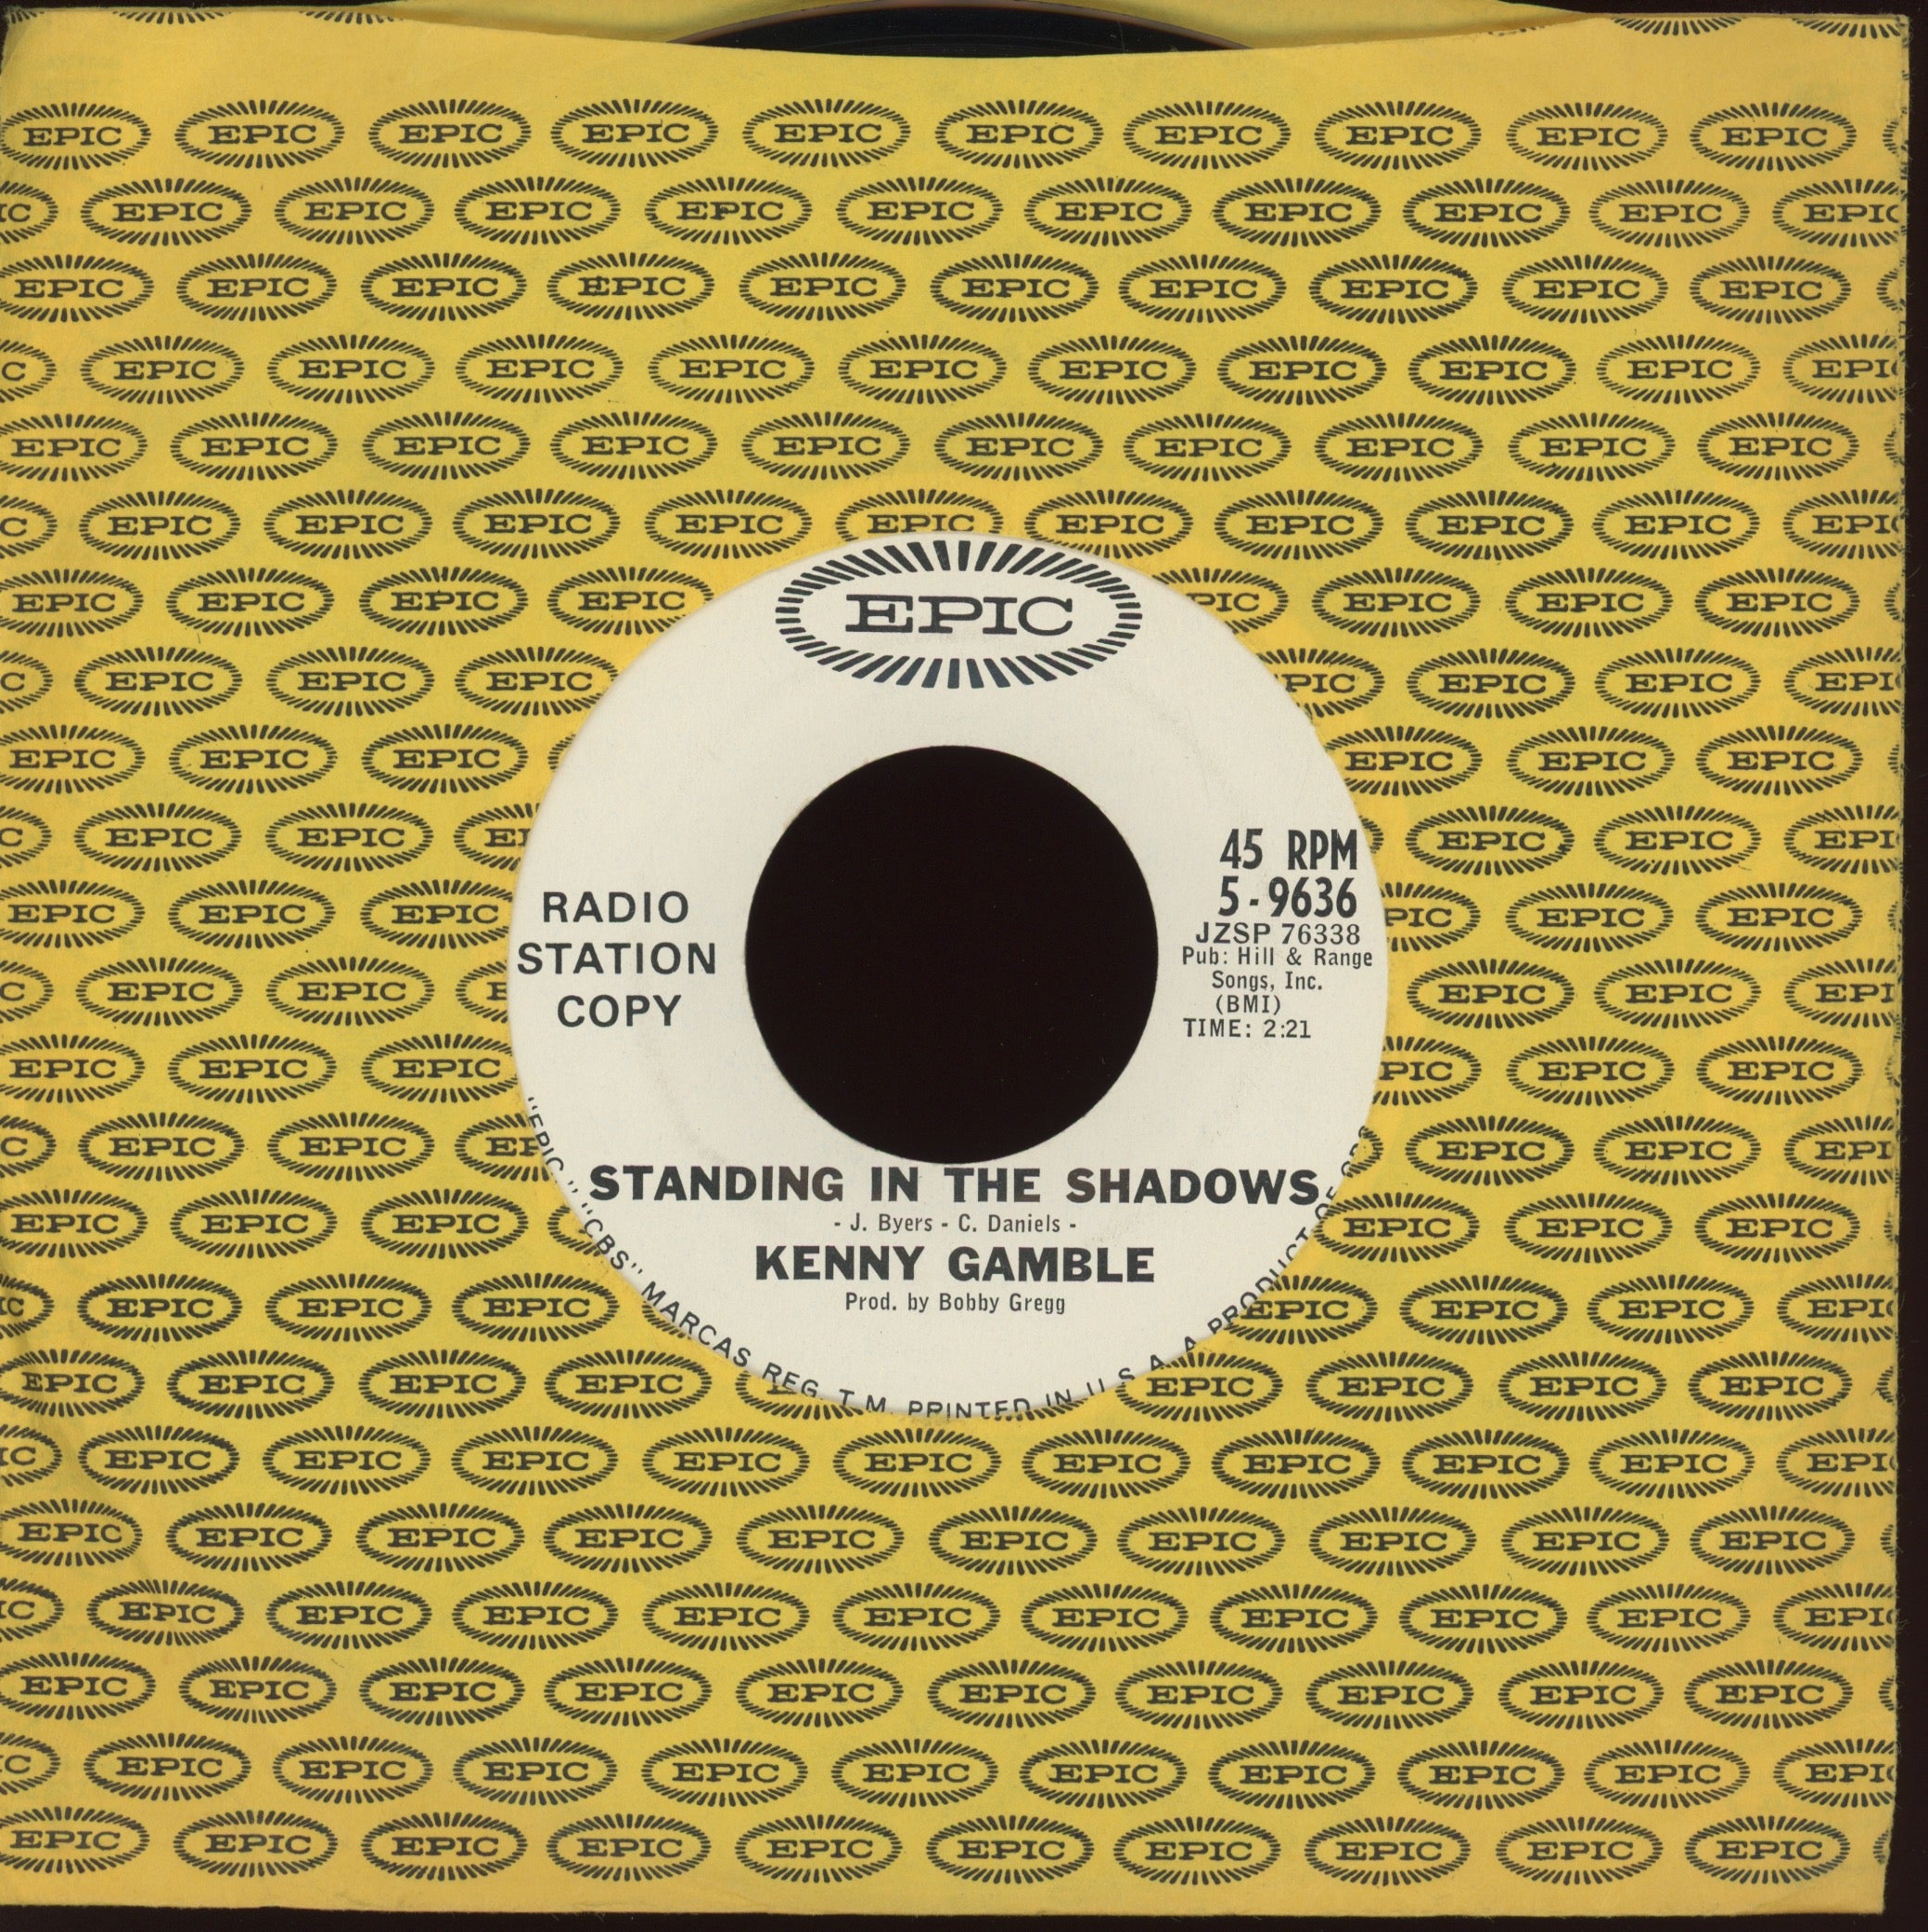 Kenny Gamble - Standing In The Shadows on Epic Promo Northern Soul 45